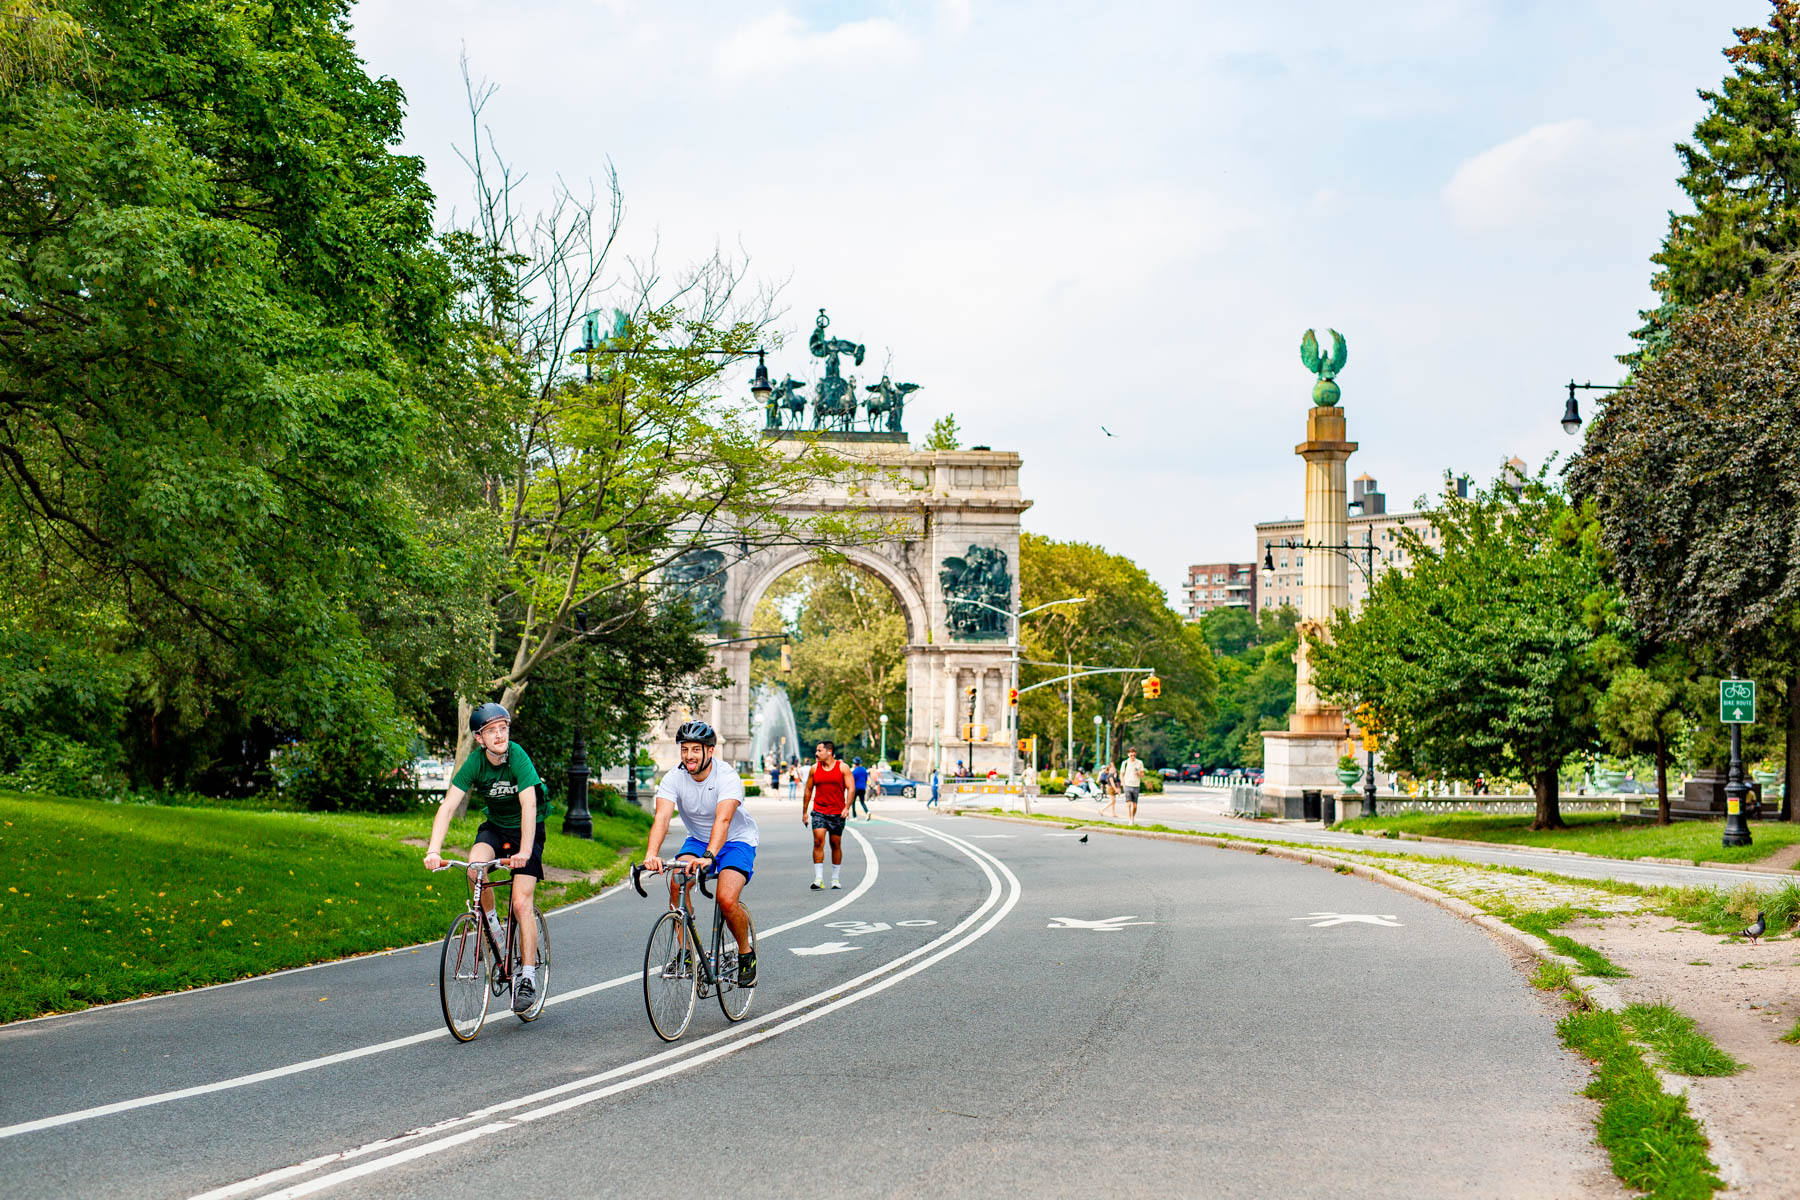 biking in Prospect Park is one of the most unique things to do in NYC